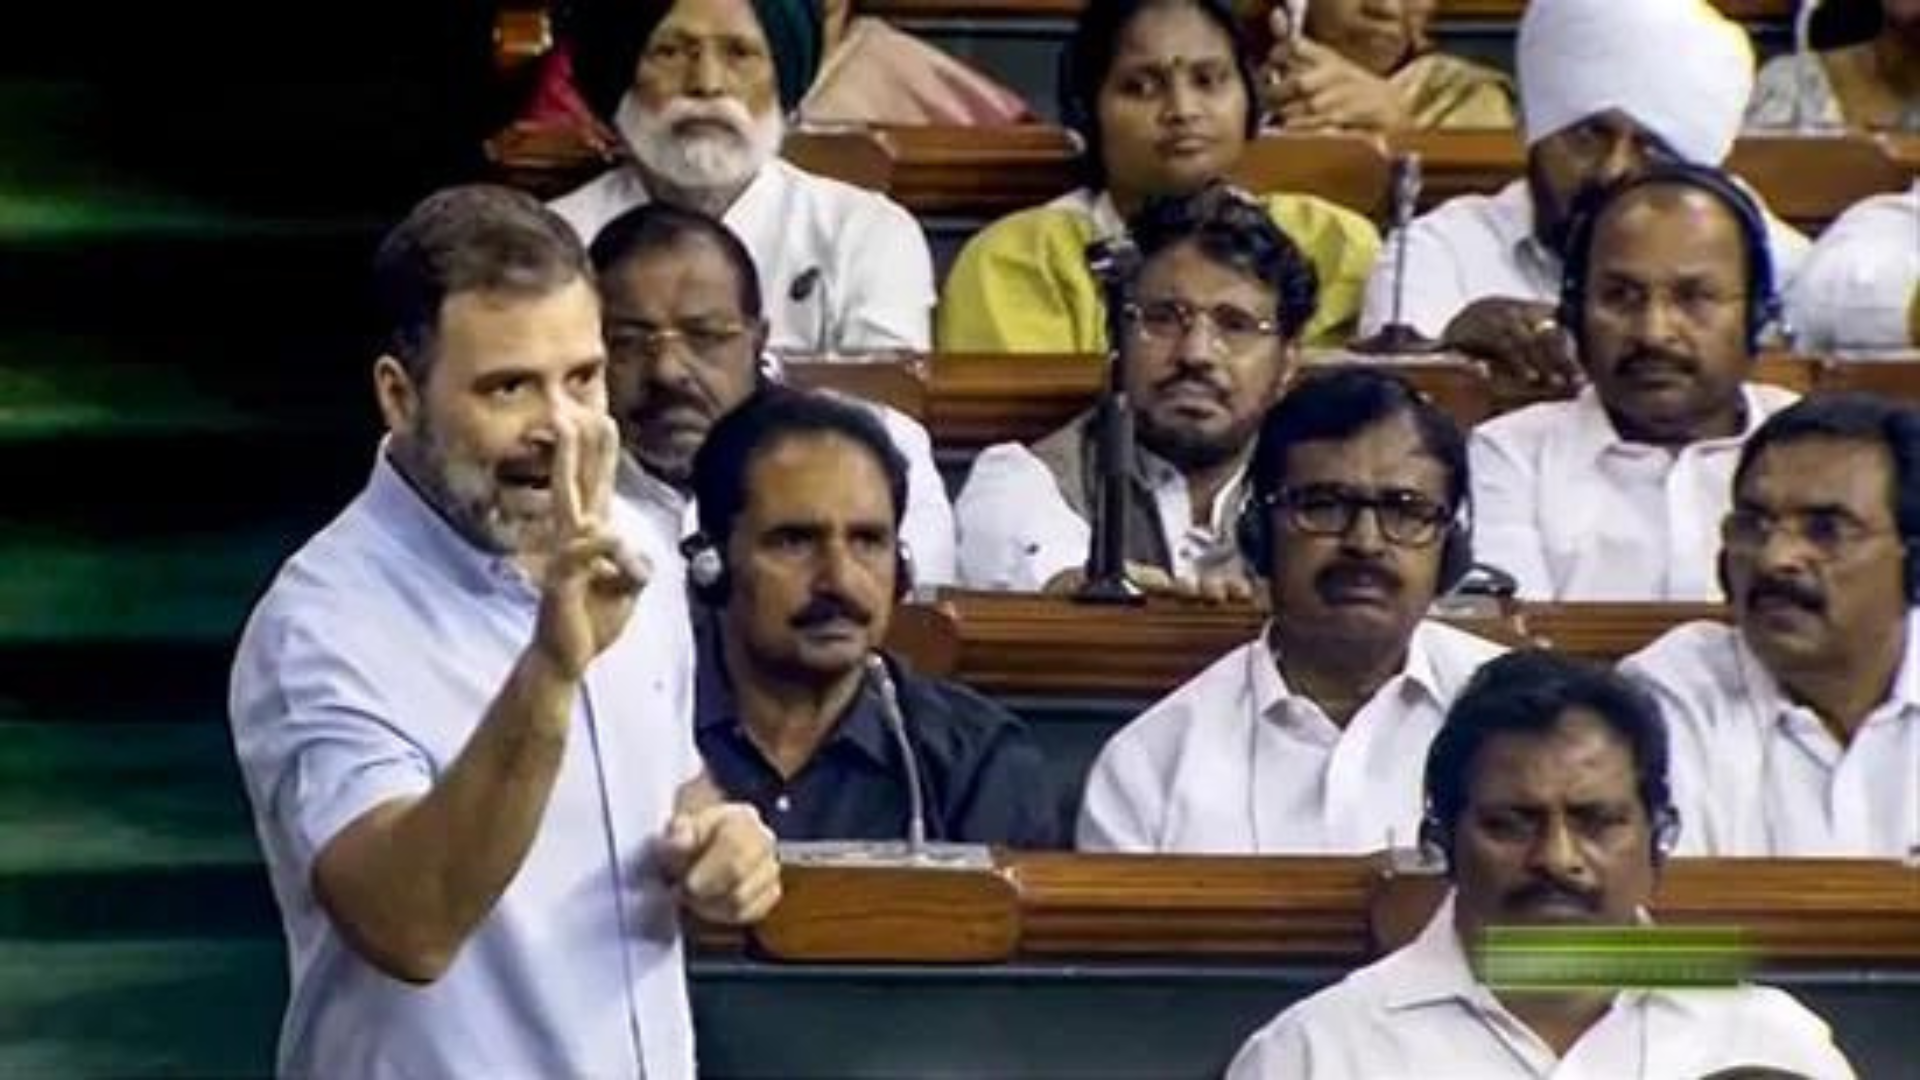 Rahul Gandhi’s Mic Muted As He Raised NEET Issue In Parliament, Claims Congress